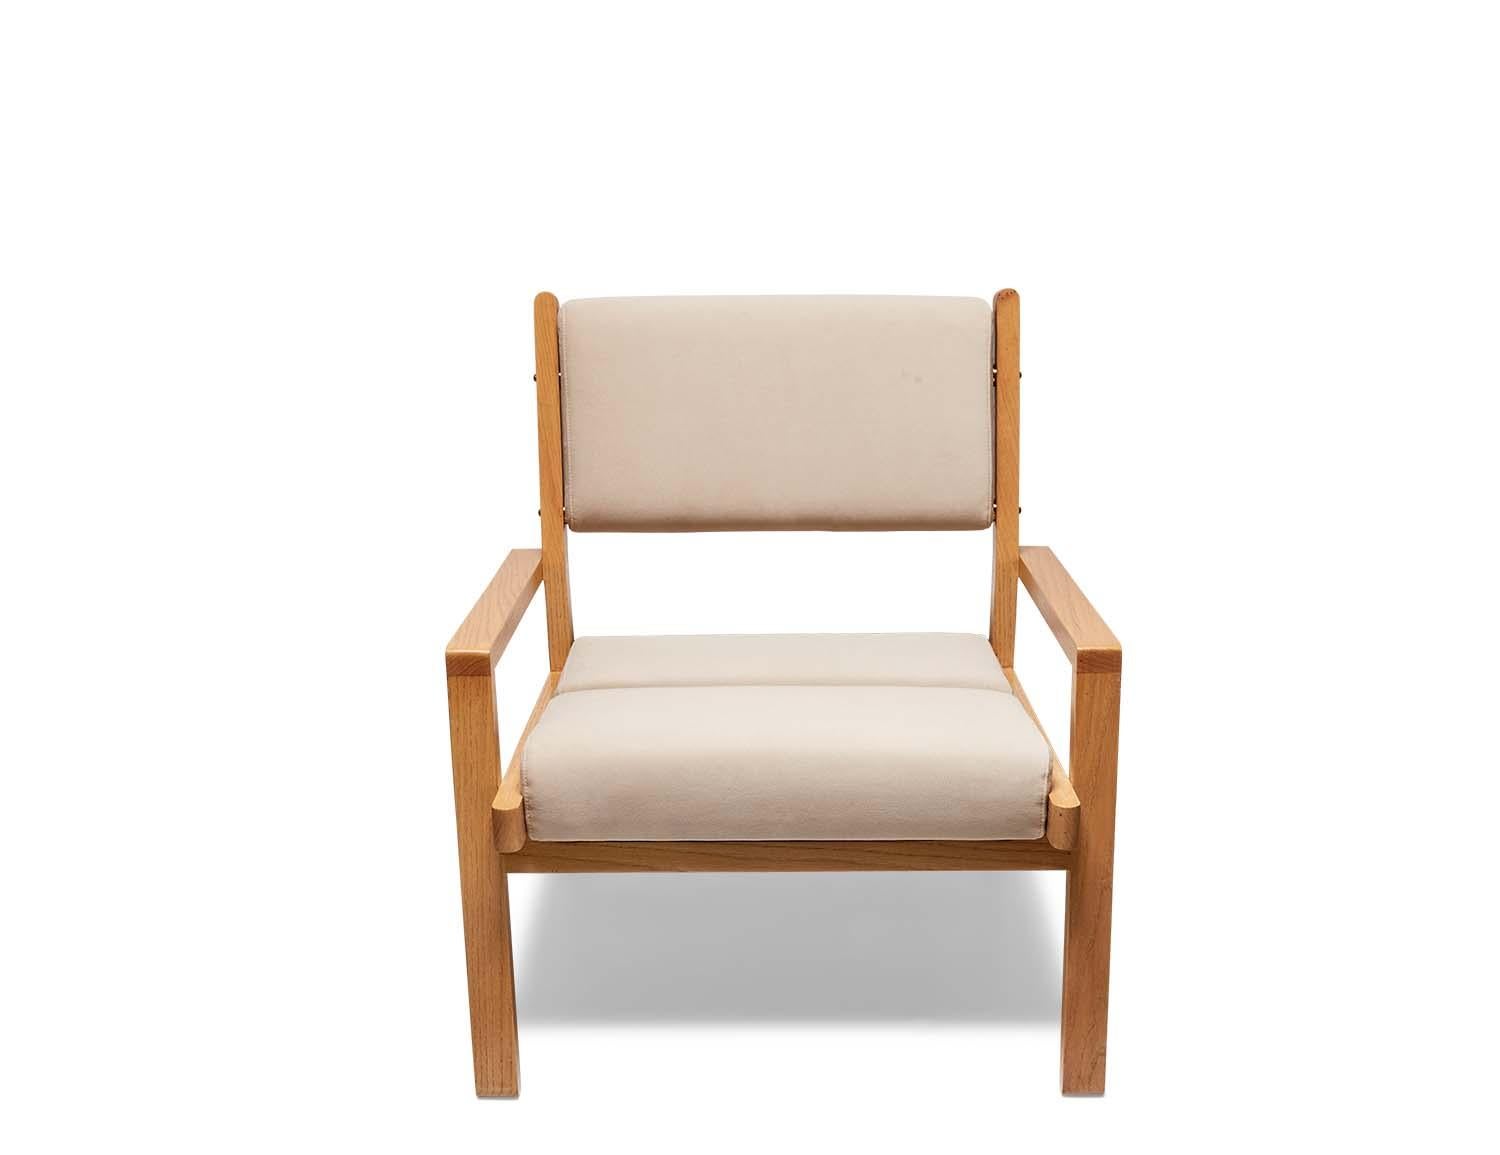 The Morro lounge chair has a solid wood frame with brass spacers and attached tufted cushions. It’s a comfortable chair with a slightly canted back and a pitched seat.

The Lawson-Fenning Collection is designed and handmade in Los Angeles,